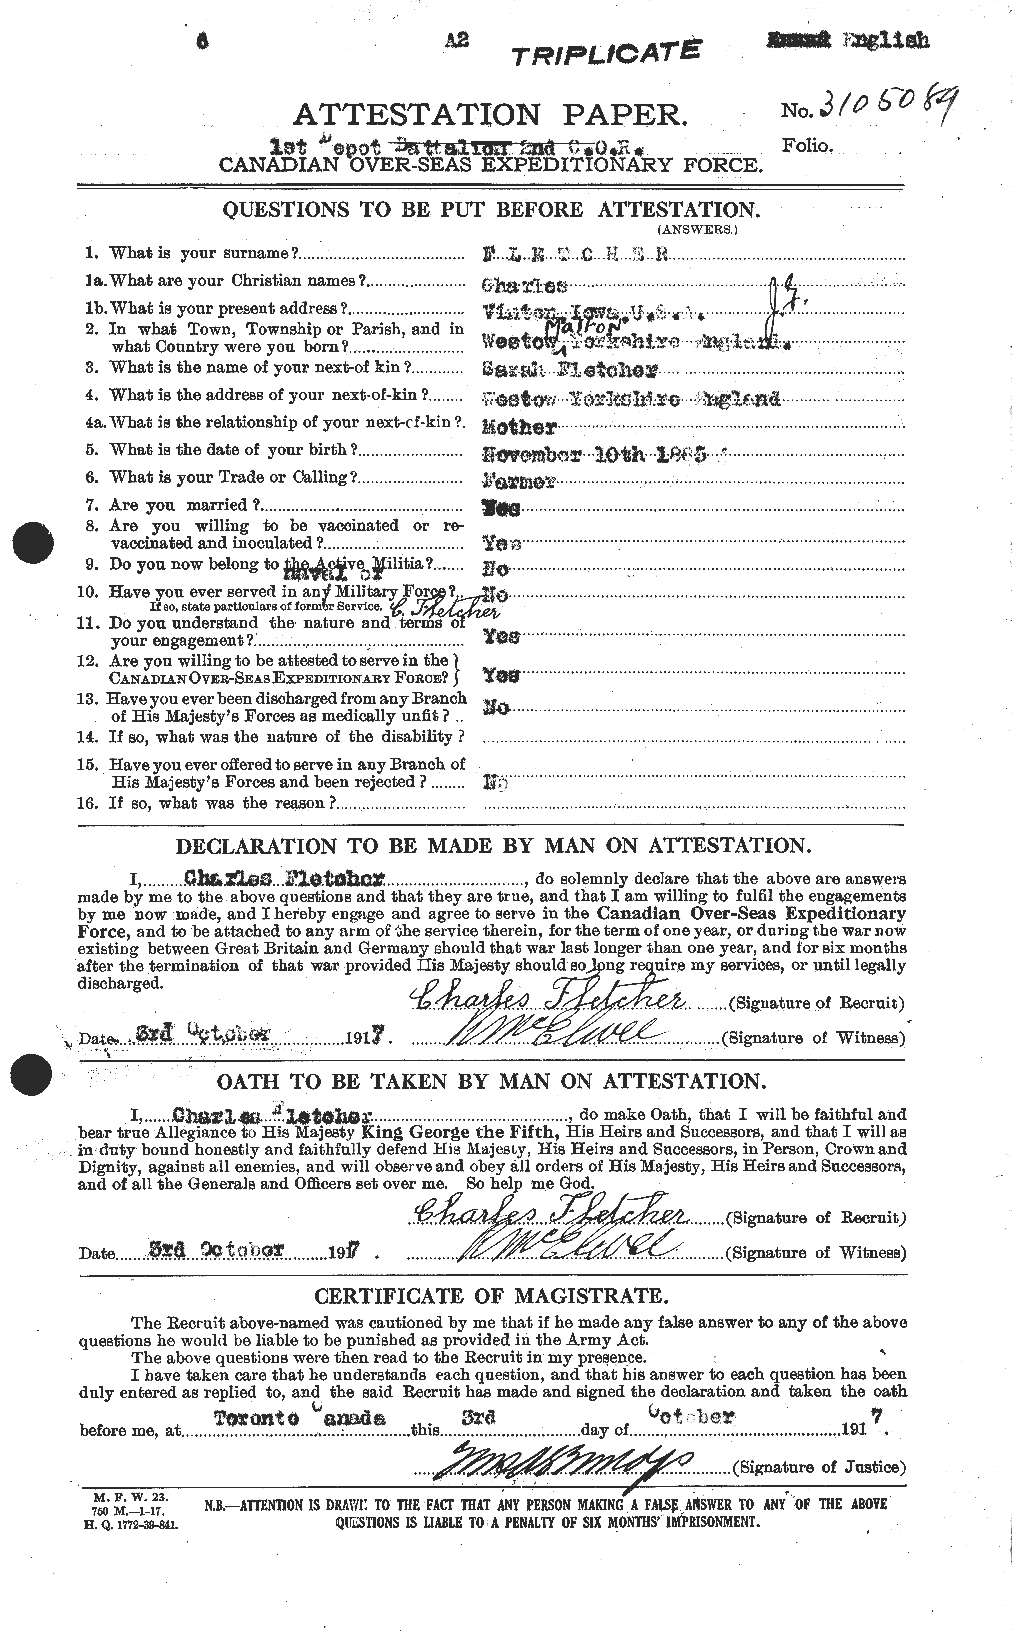 Personnel Records of the First World War - CEF 327157a